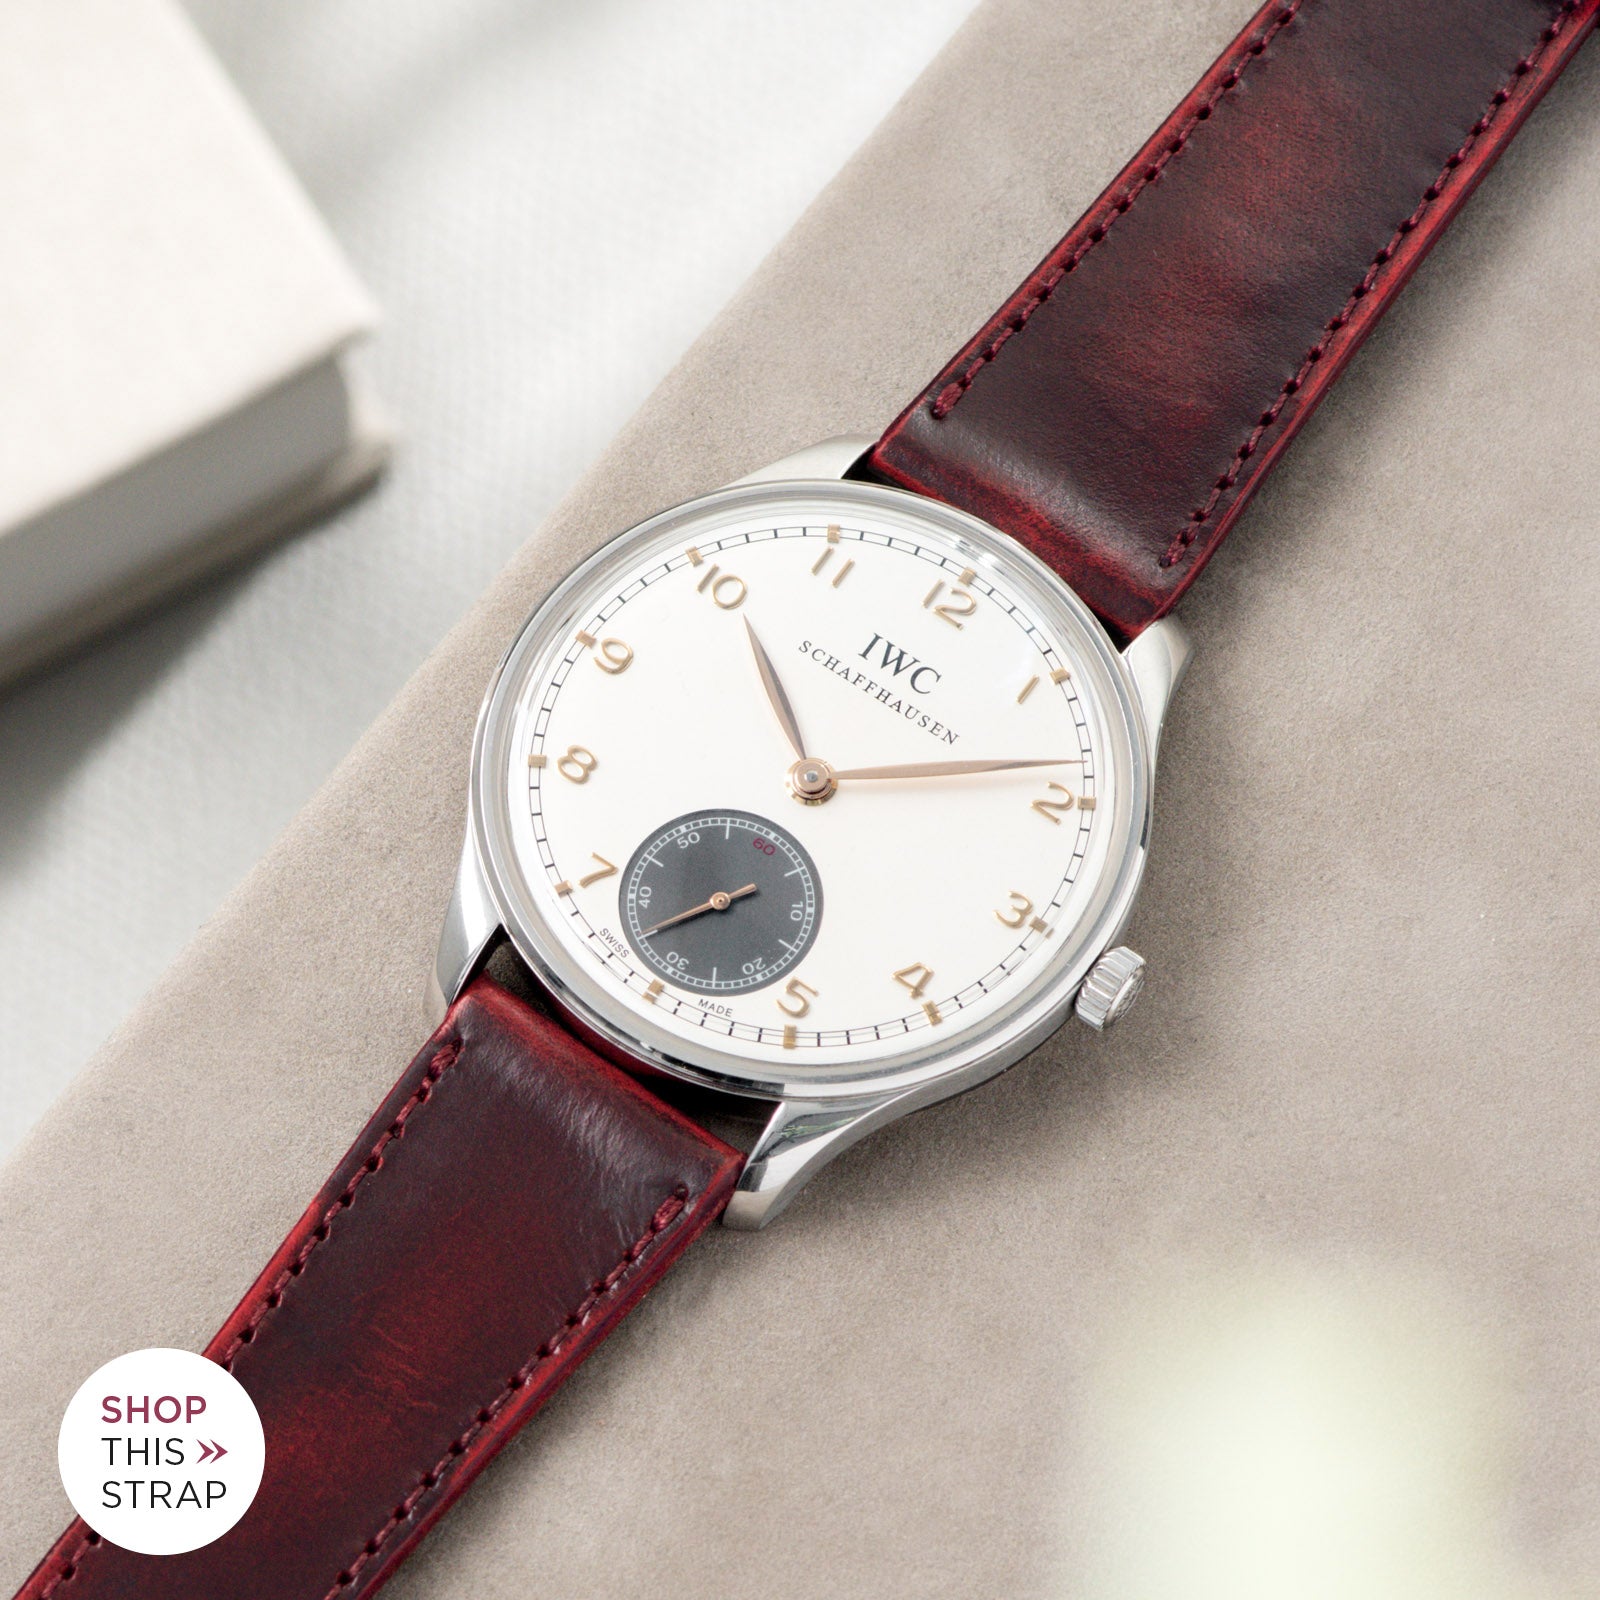 Bulang and Sons_Strap Guide_IWC Portuguese Ref IW545405_Degrade Chili Red Leather Watch Strap